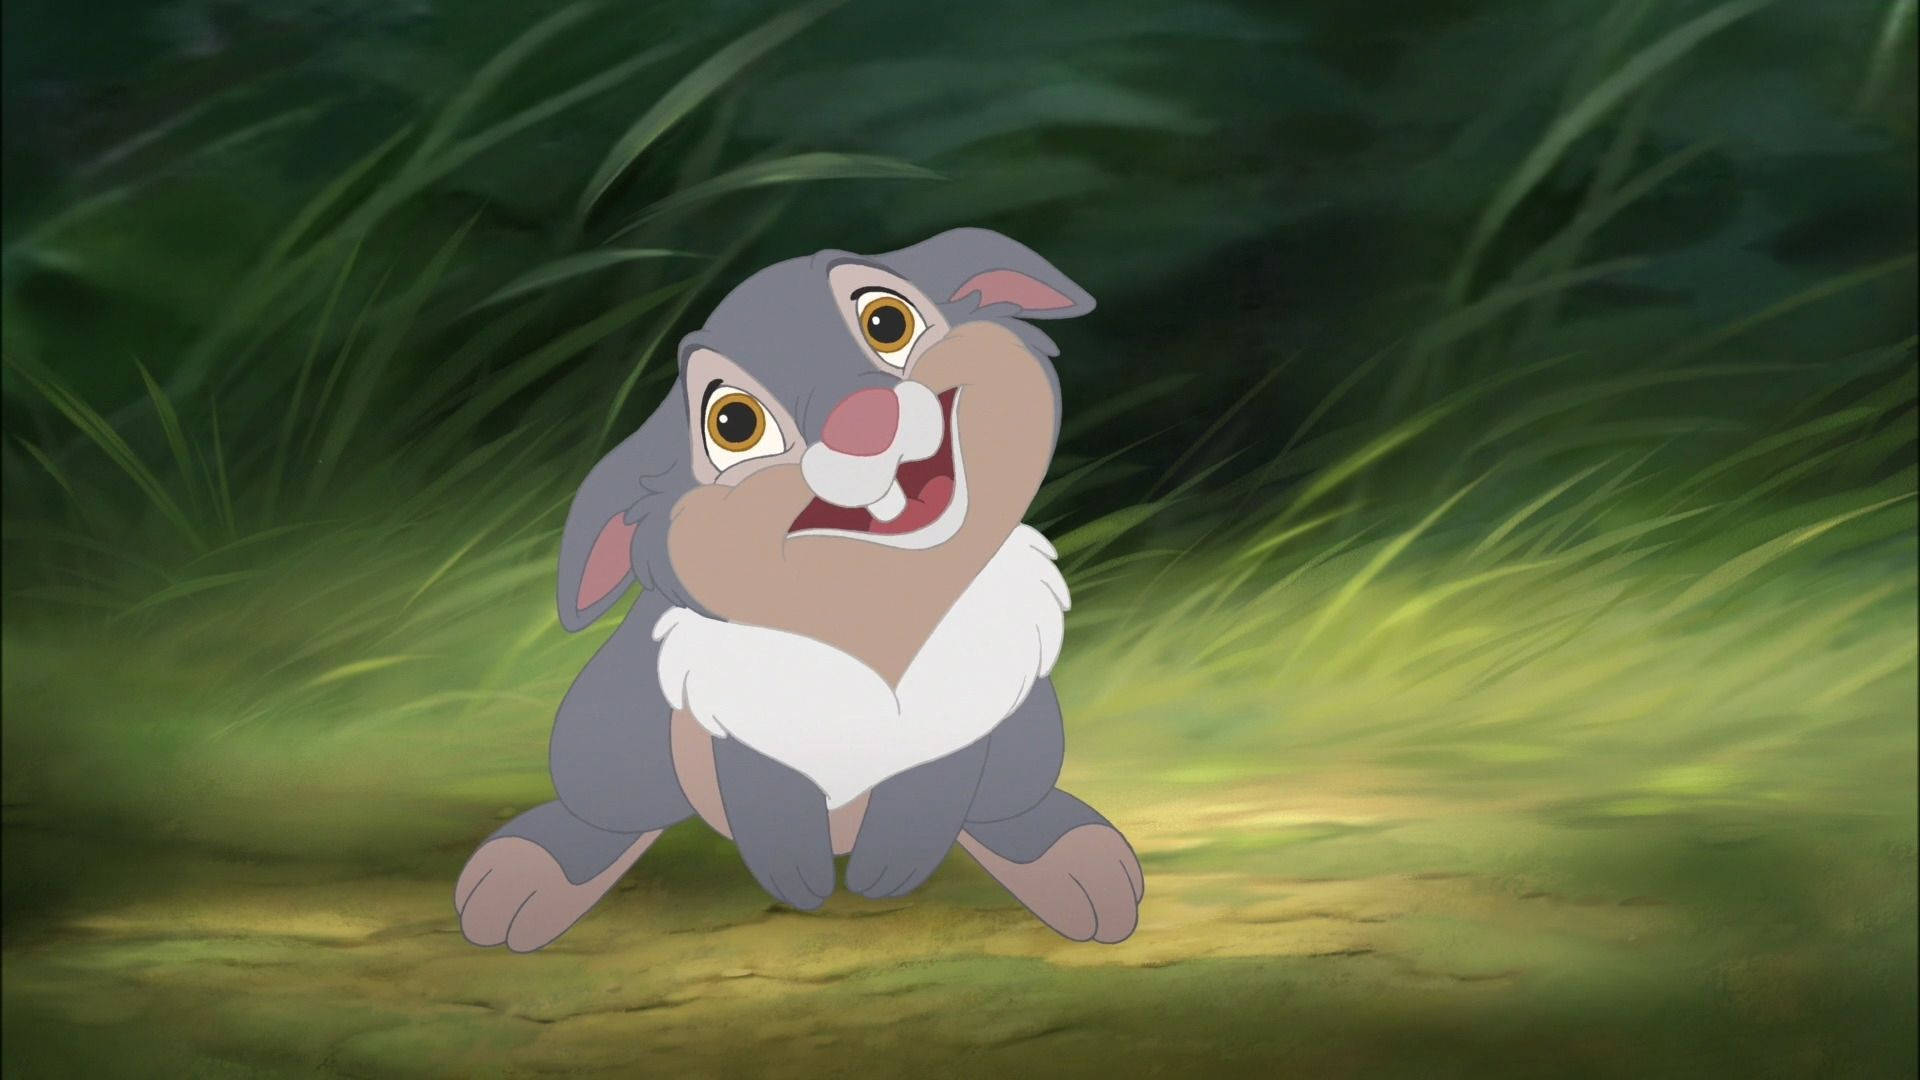 Thumper Smiling Shyly Background